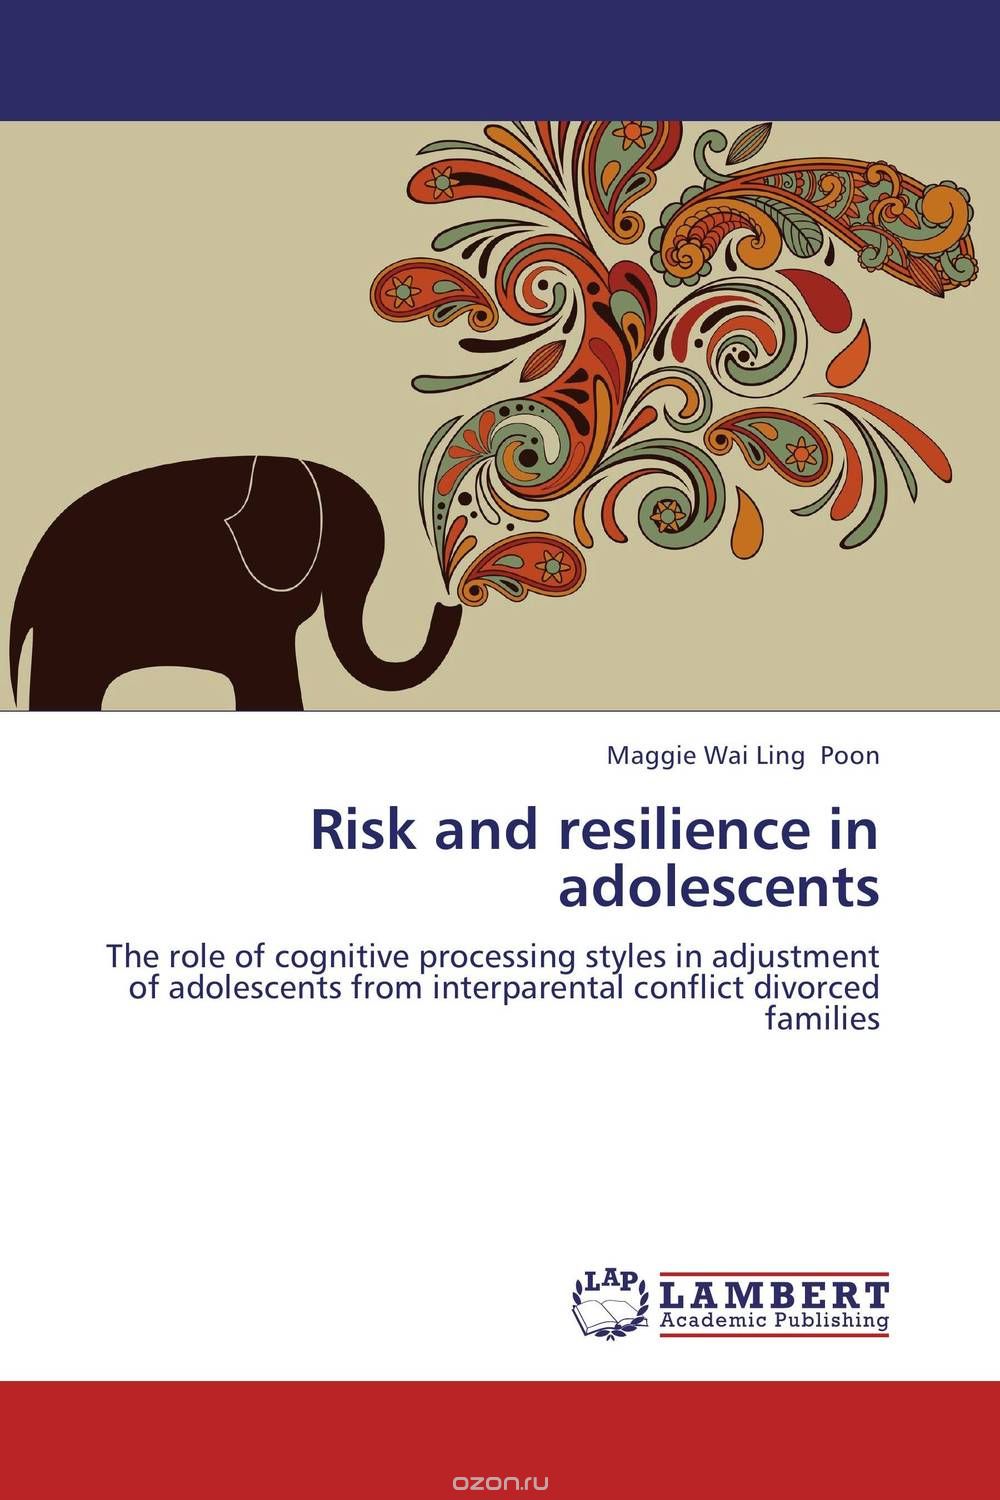 Скачать книгу "Risk and resilience in adolescents"